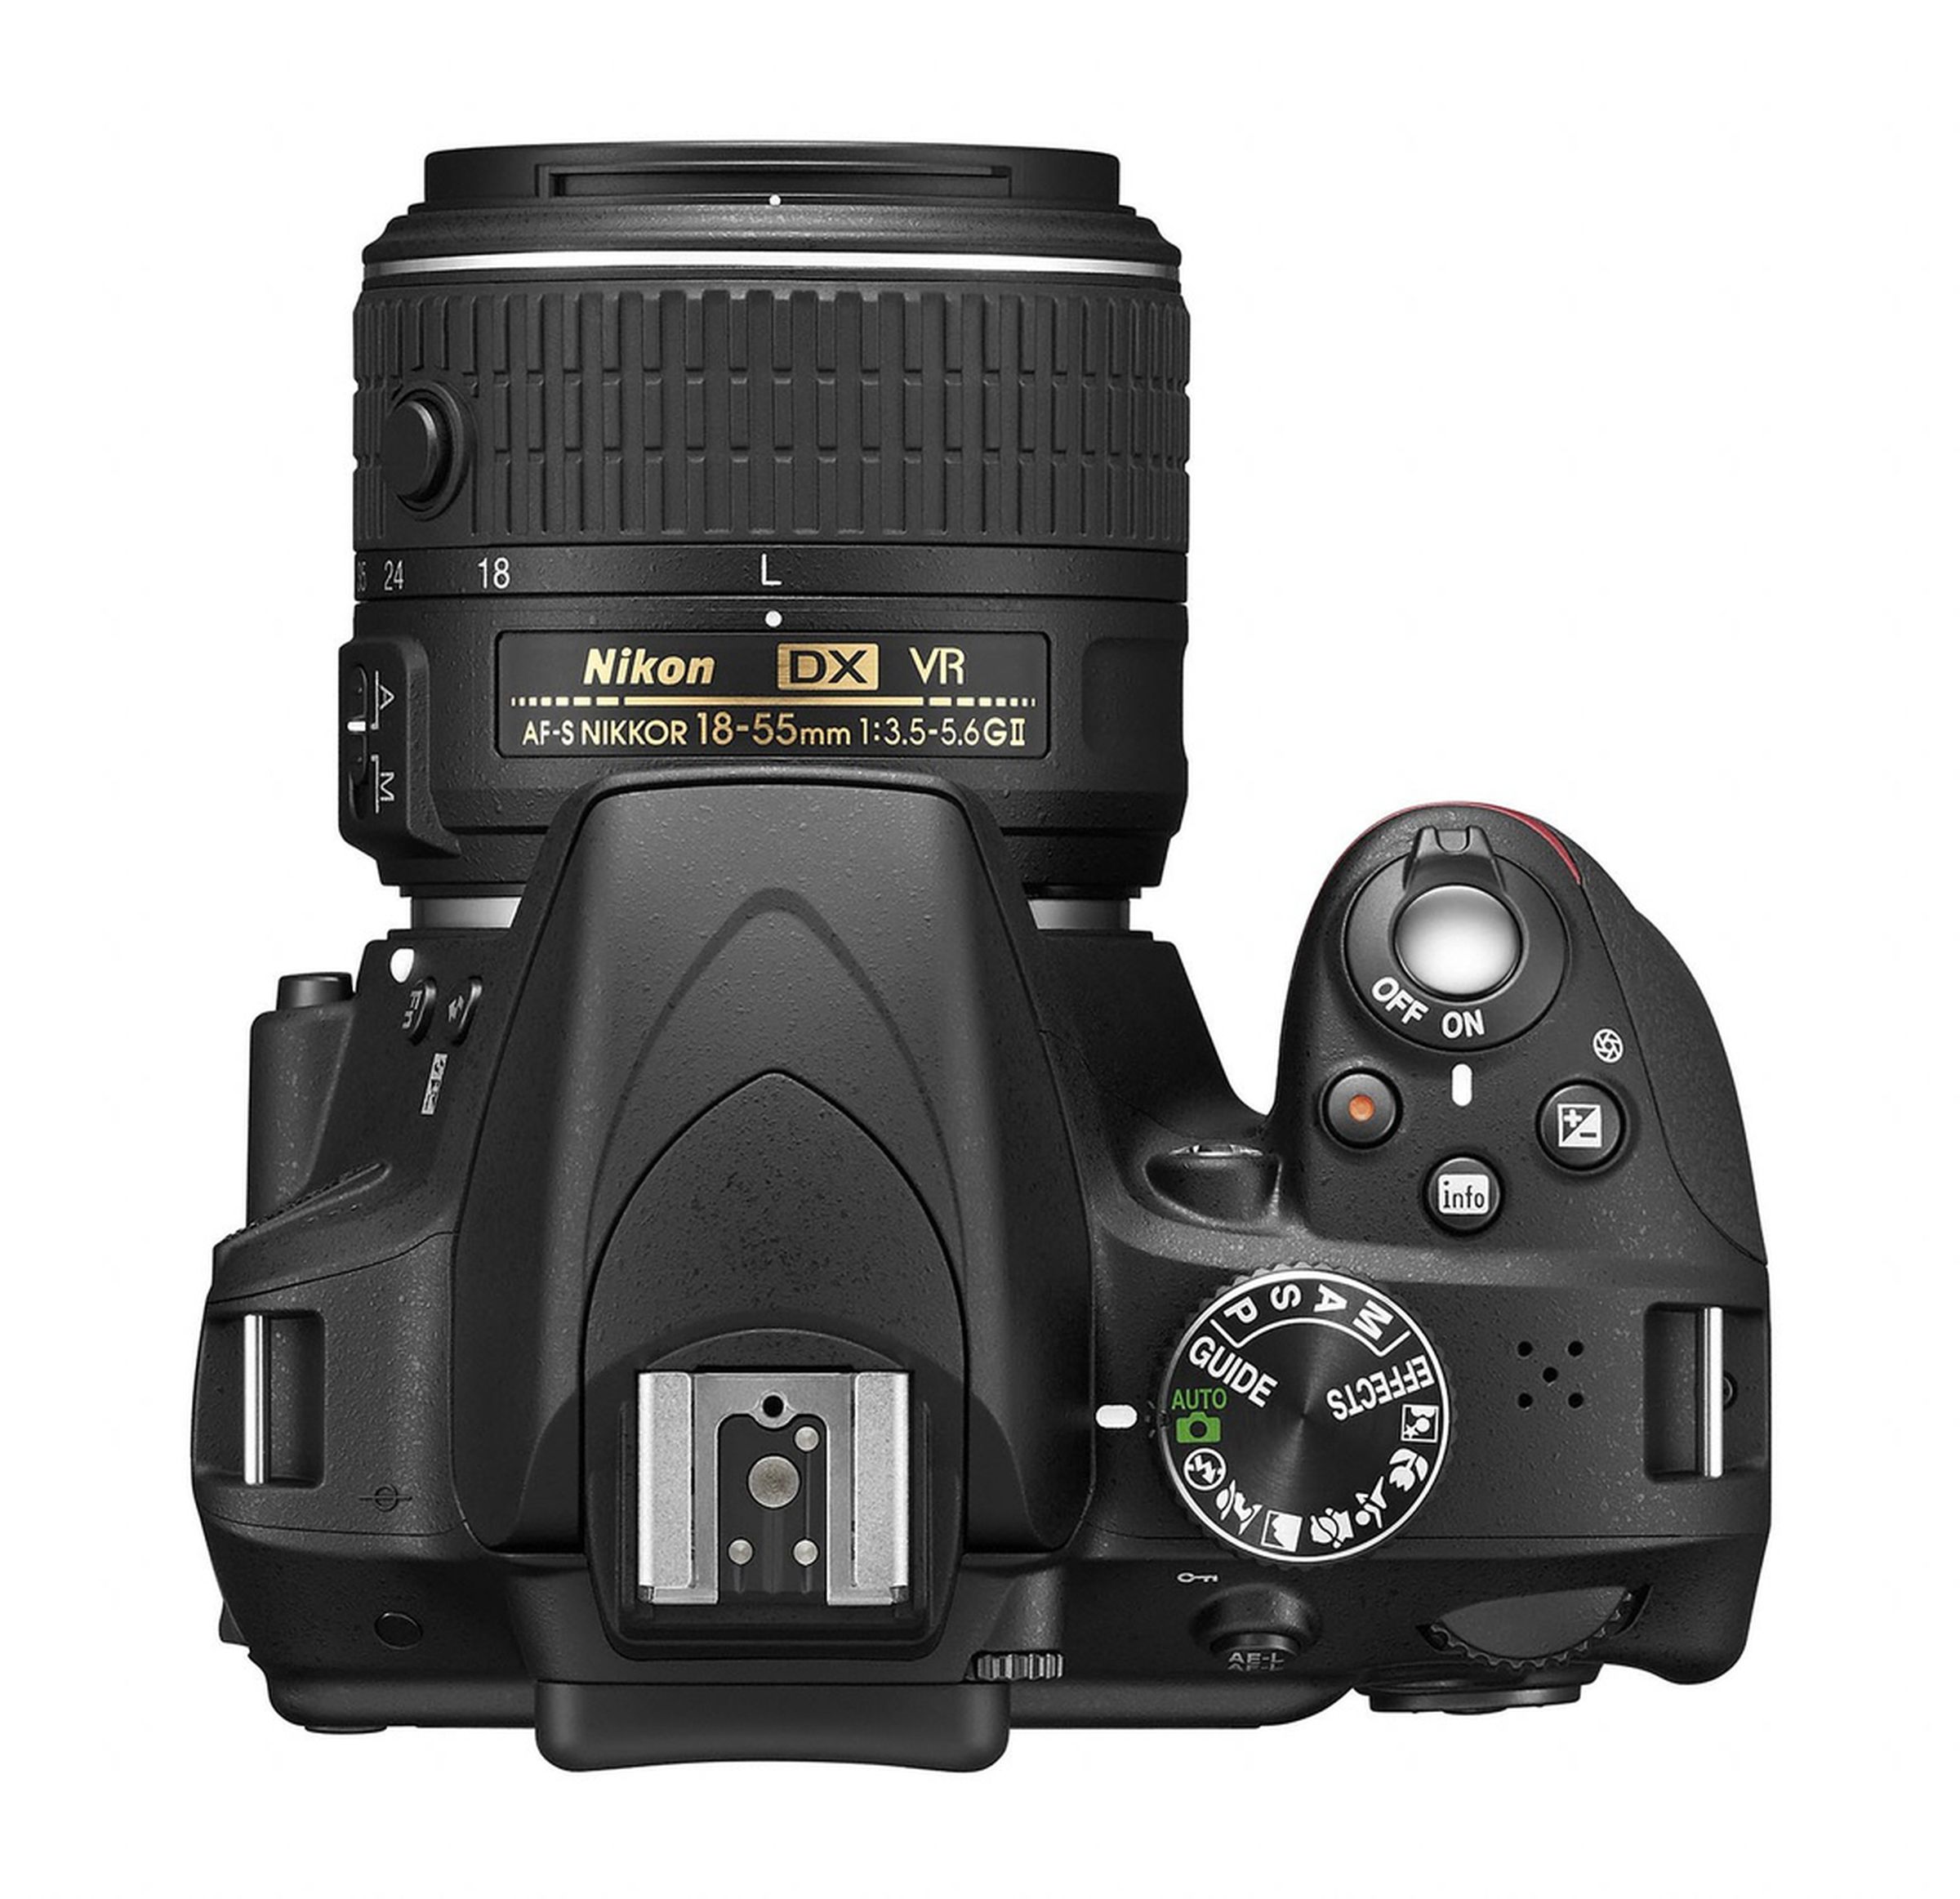 Nikon D3300 and Coolpix at CES 2014